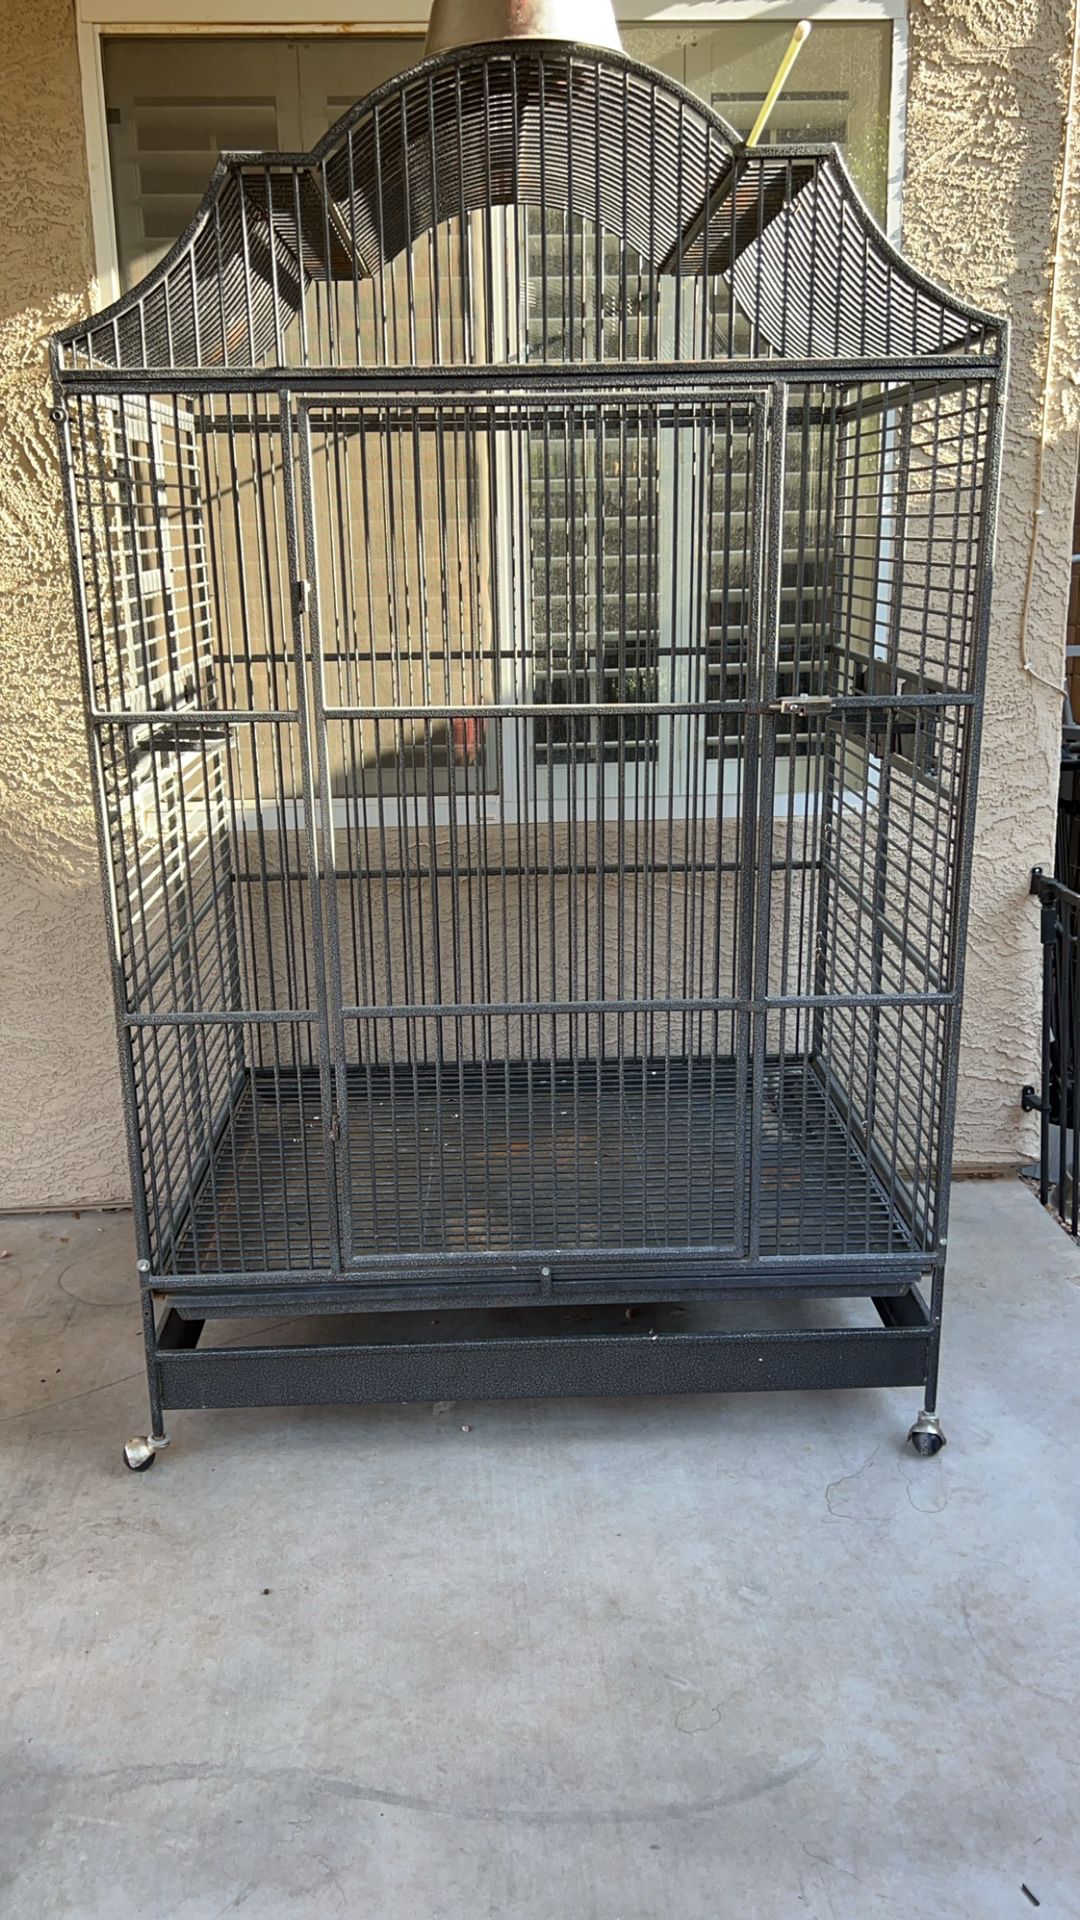 Parrot/Bird Cage X large 